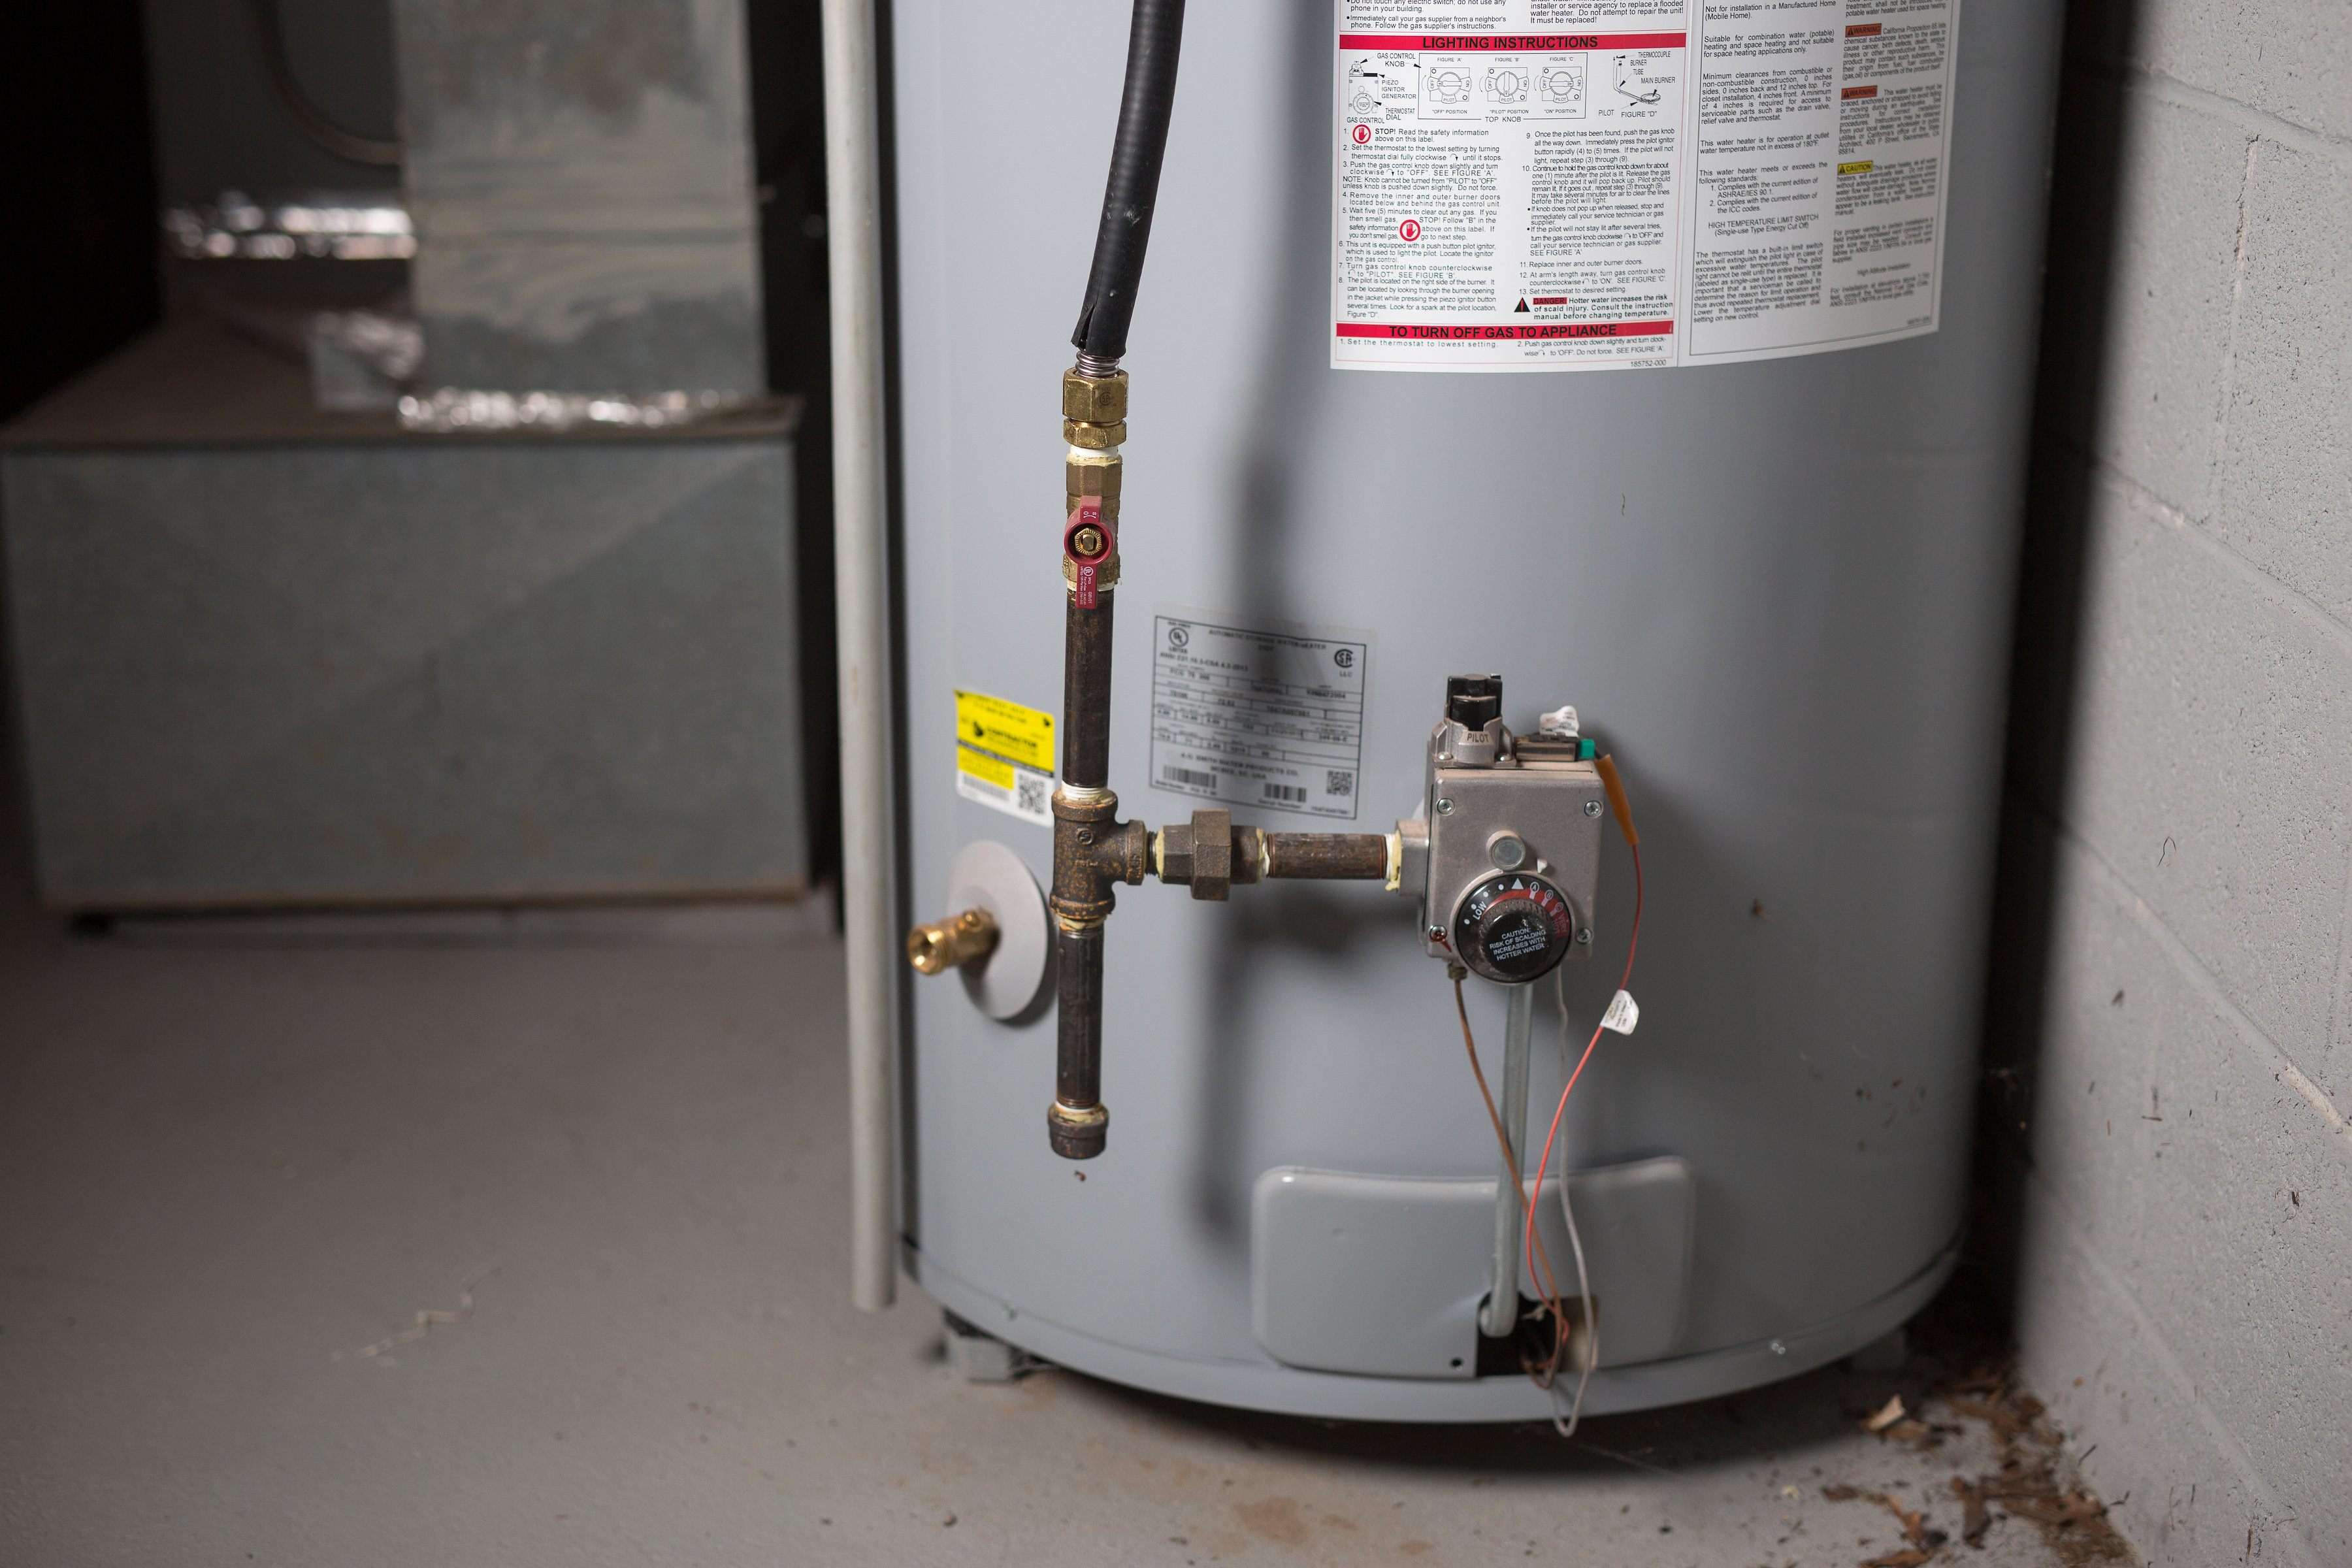 Water Heater Repair Coverage Plans L Homeserve,How Much Is A 1964 Quarter Worth In 2020